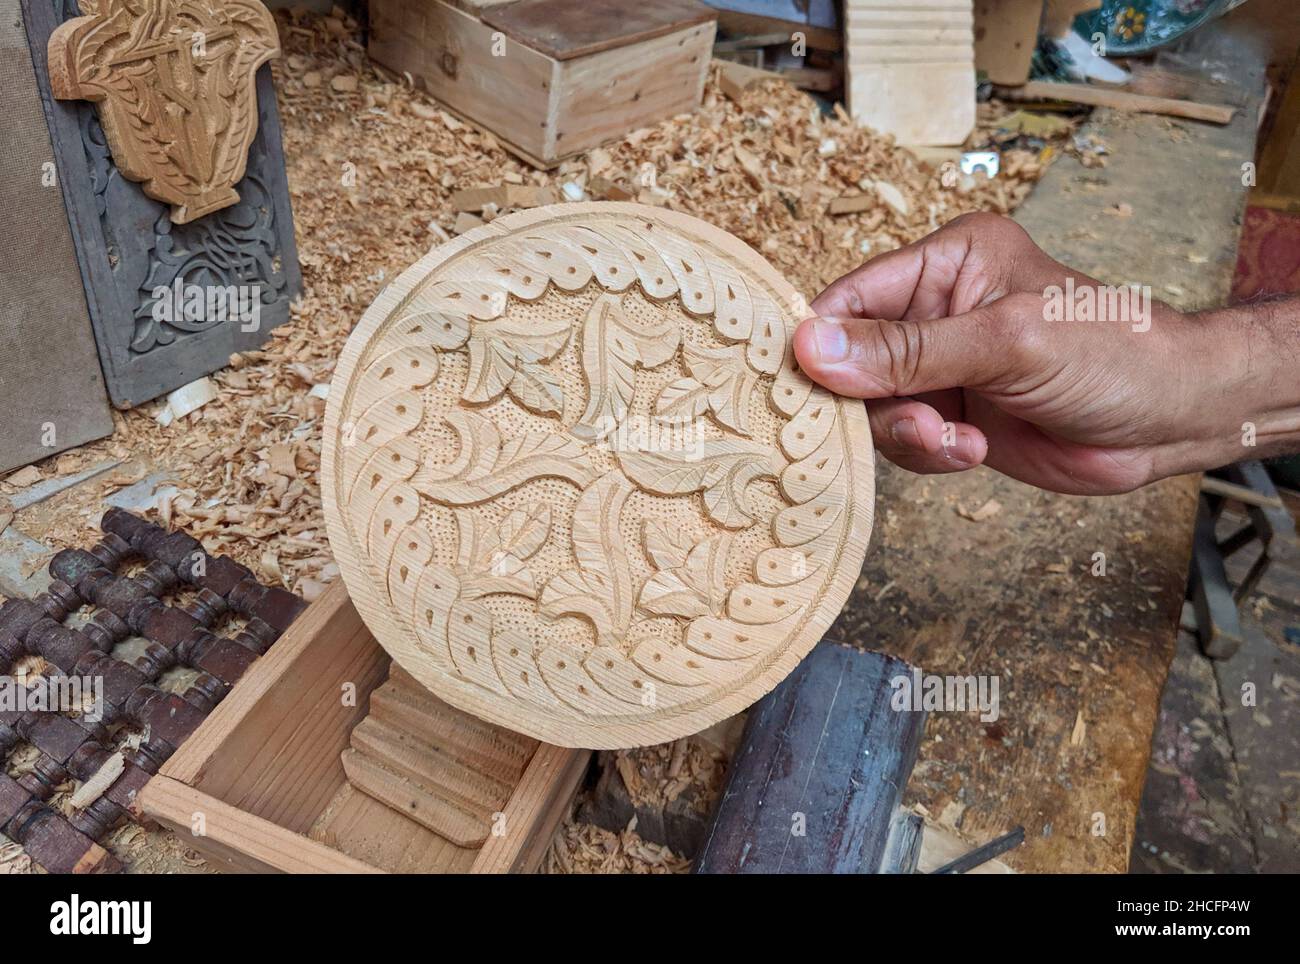 Wood crafts in the hand of a craftsman man in a wood workshop. Stock Photo